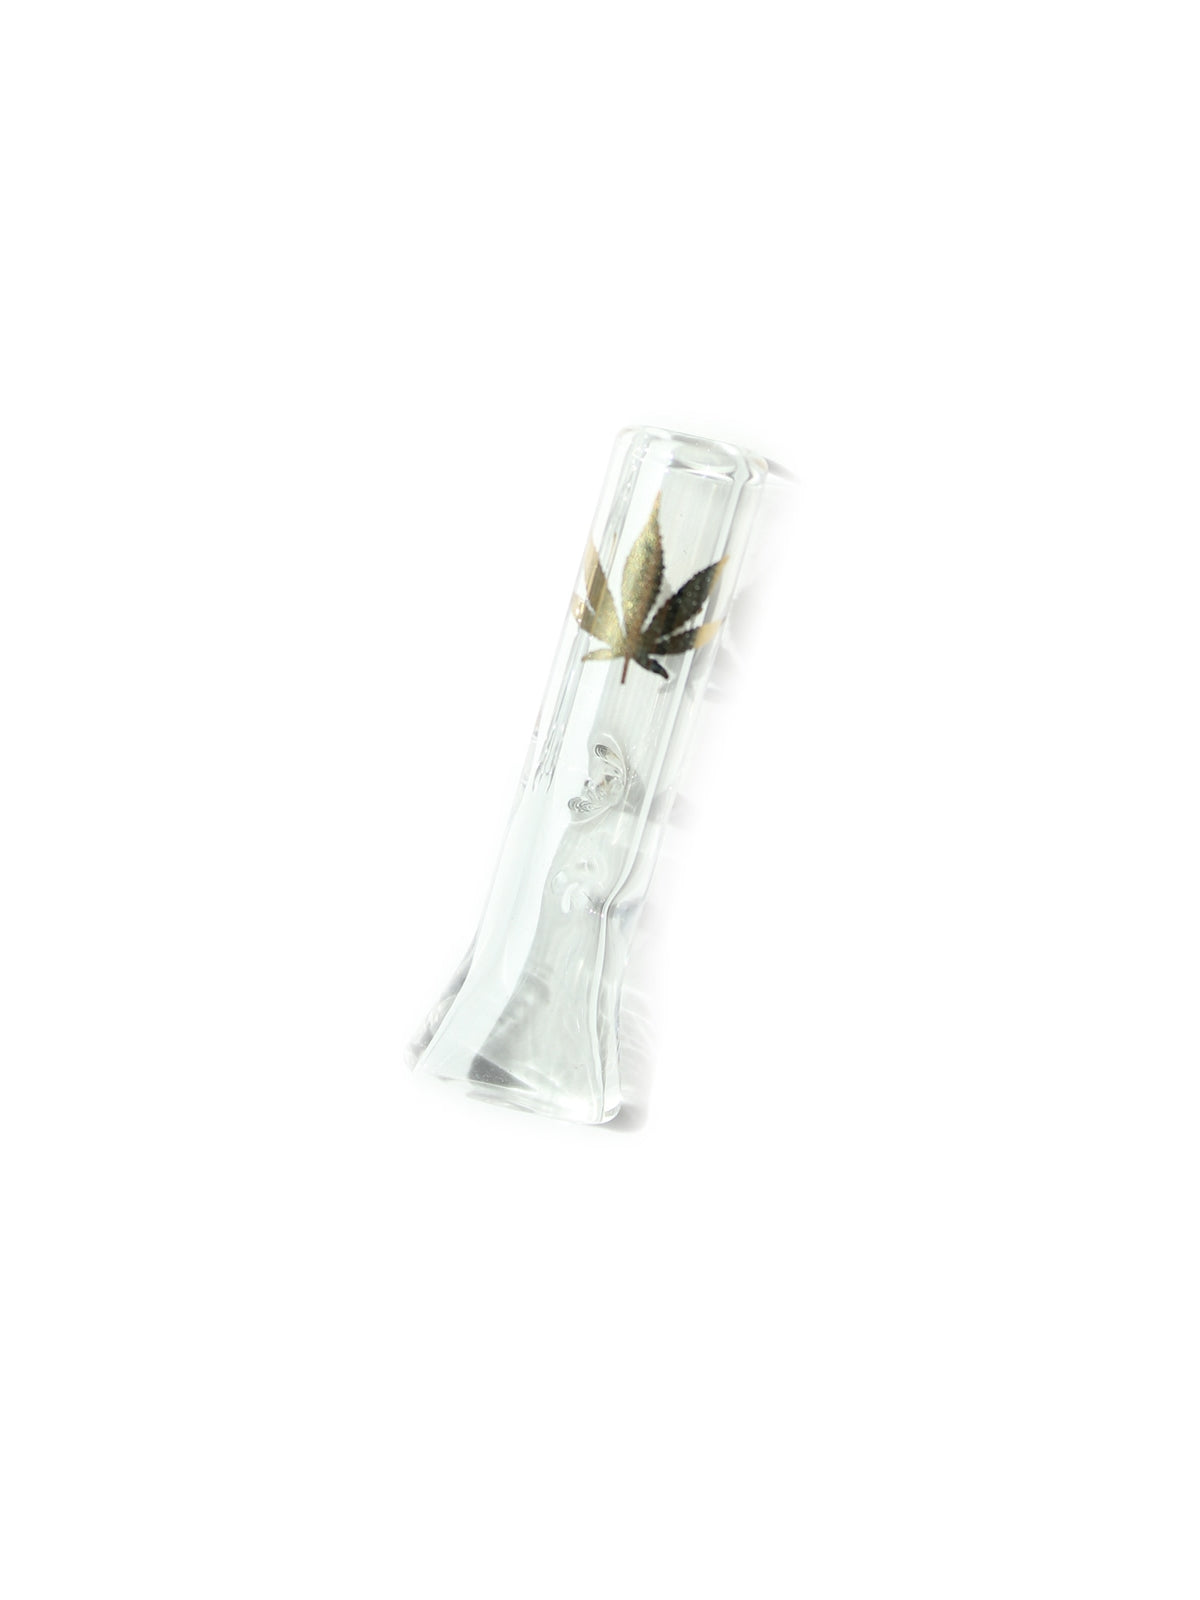 Rogue Paq Resuable Glass Tips 2 Pack